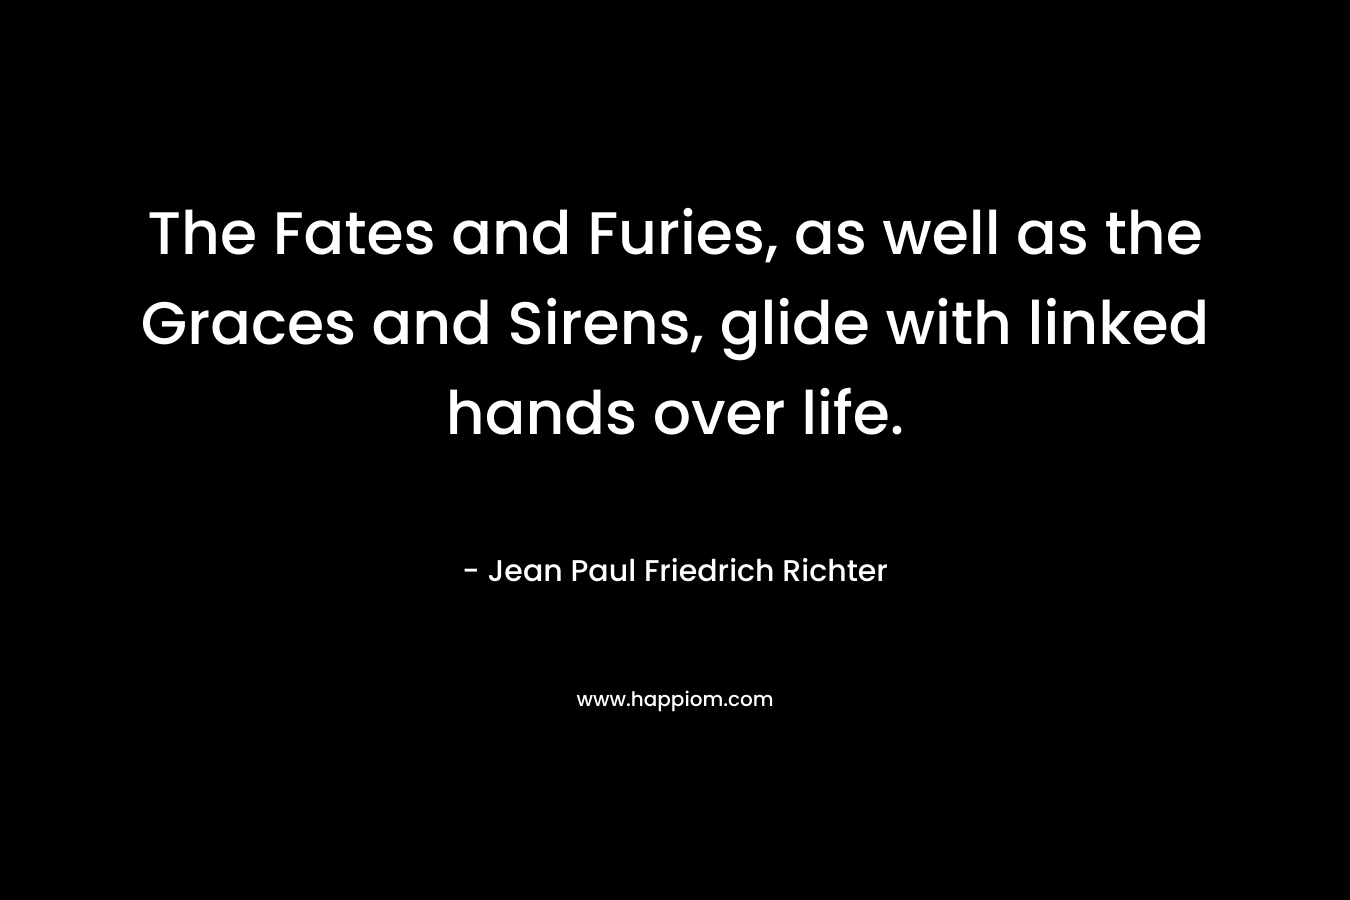 The Fates and Furies, as well as the Graces and Sirens, glide with linked hands over life. – Jean Paul Friedrich Richter